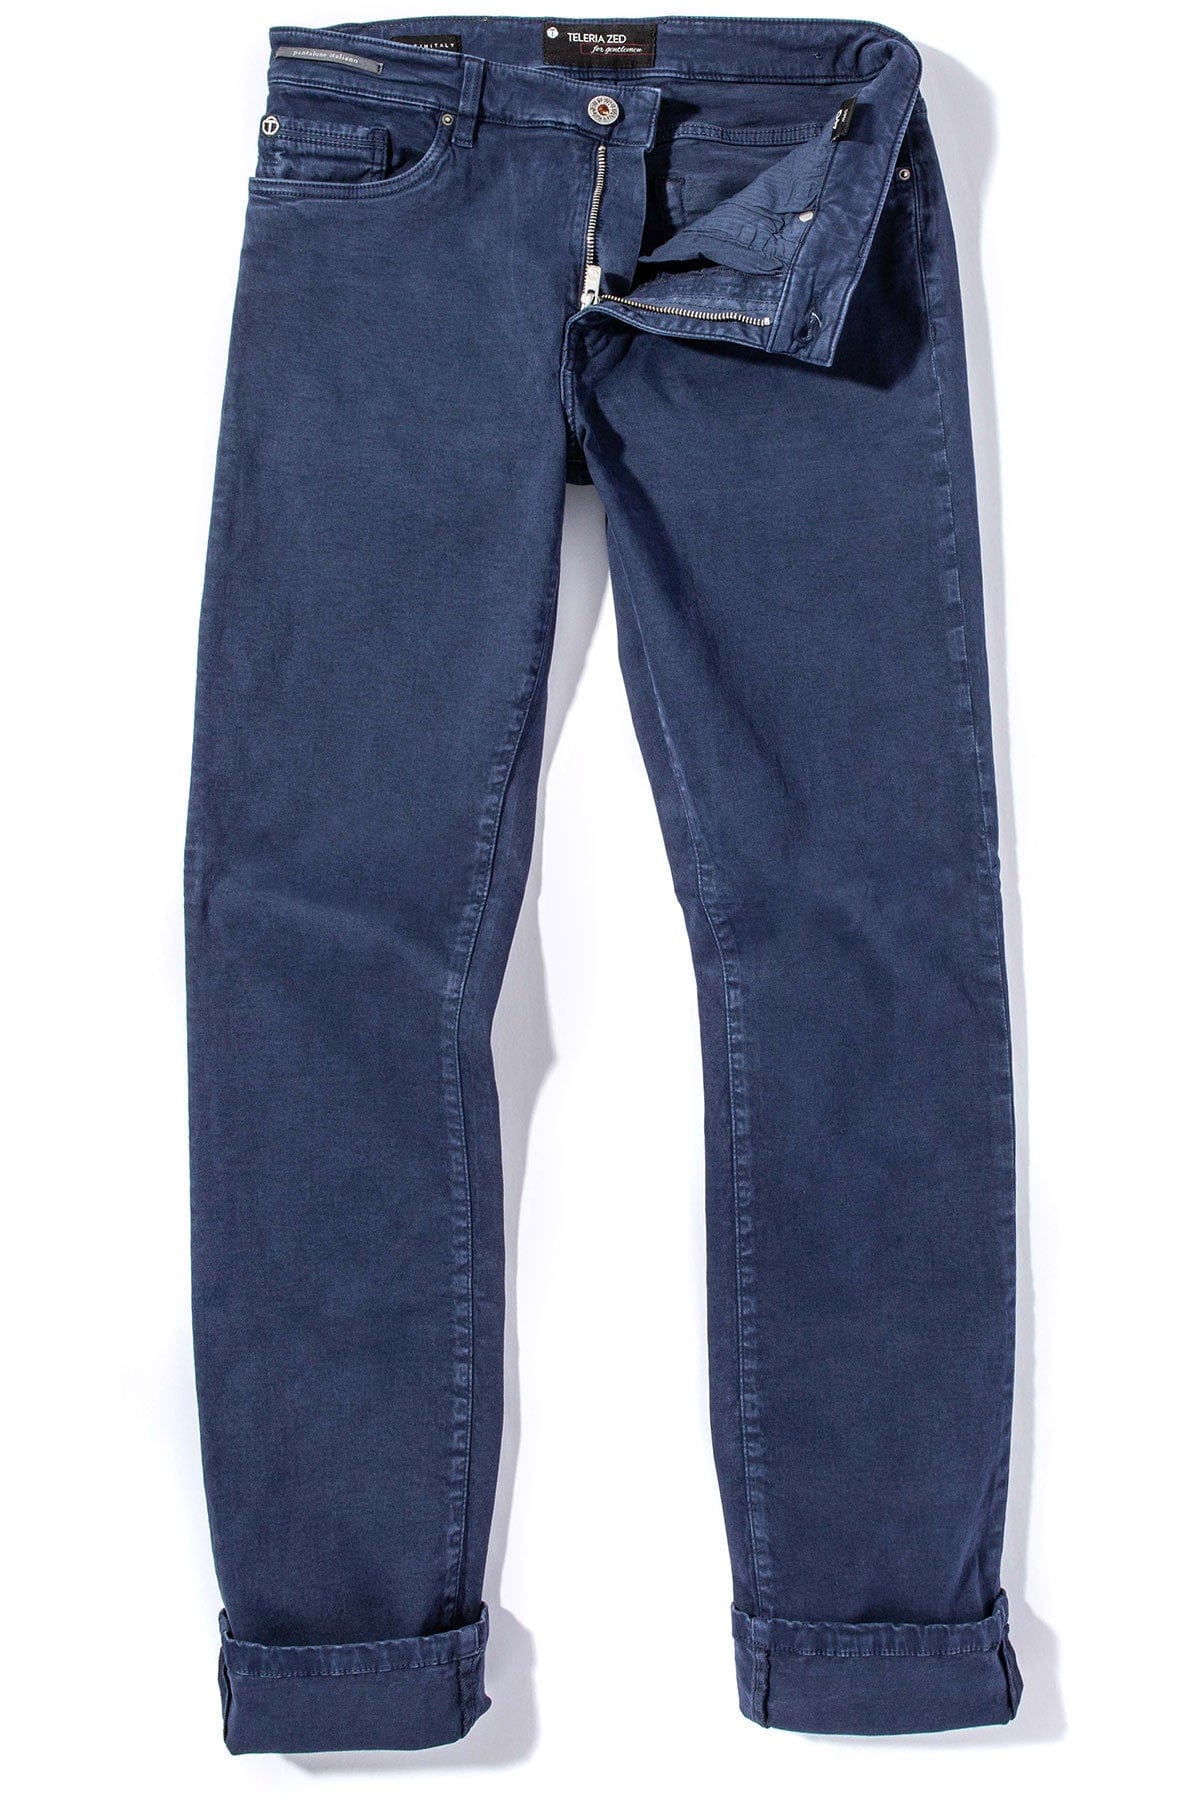 Ryland Rugged Soft Touch Cotton Jeans in Indaco - AXEL'S